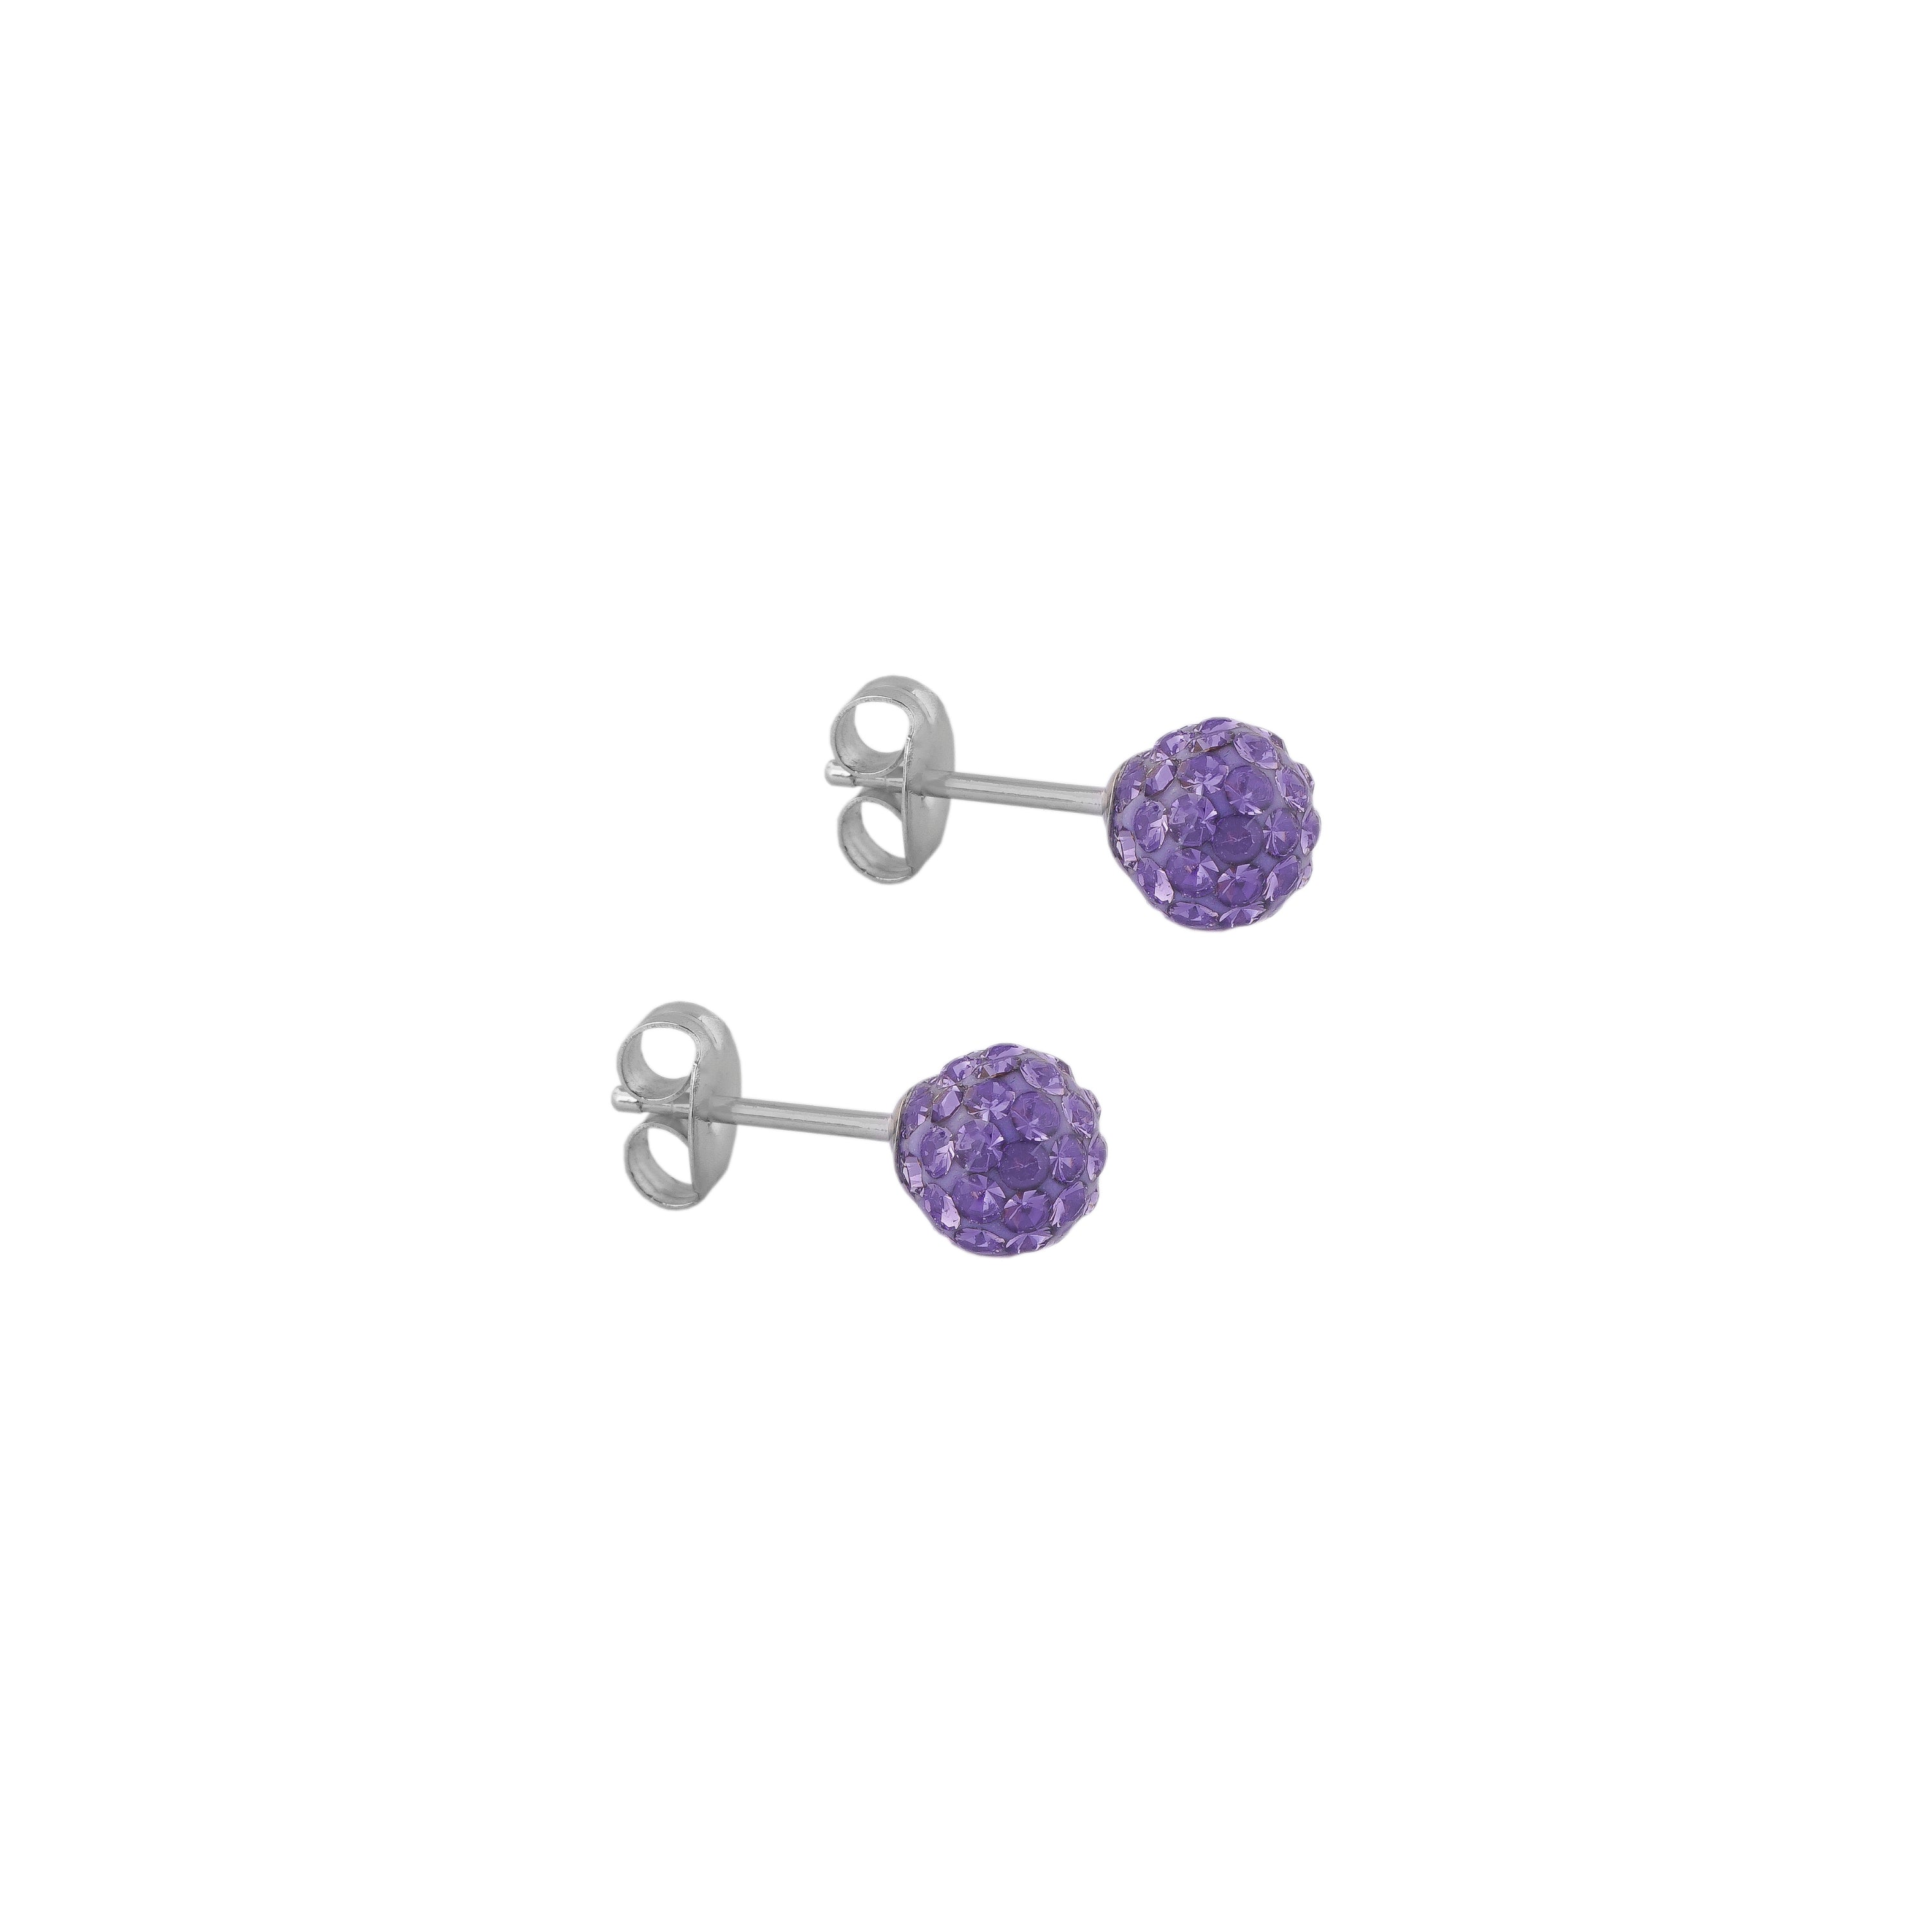 6MM Fireball Ð Tanzanite Allergy free Stainless Steel Ear Studs | MADE IN USA | Ideal for everyday wear